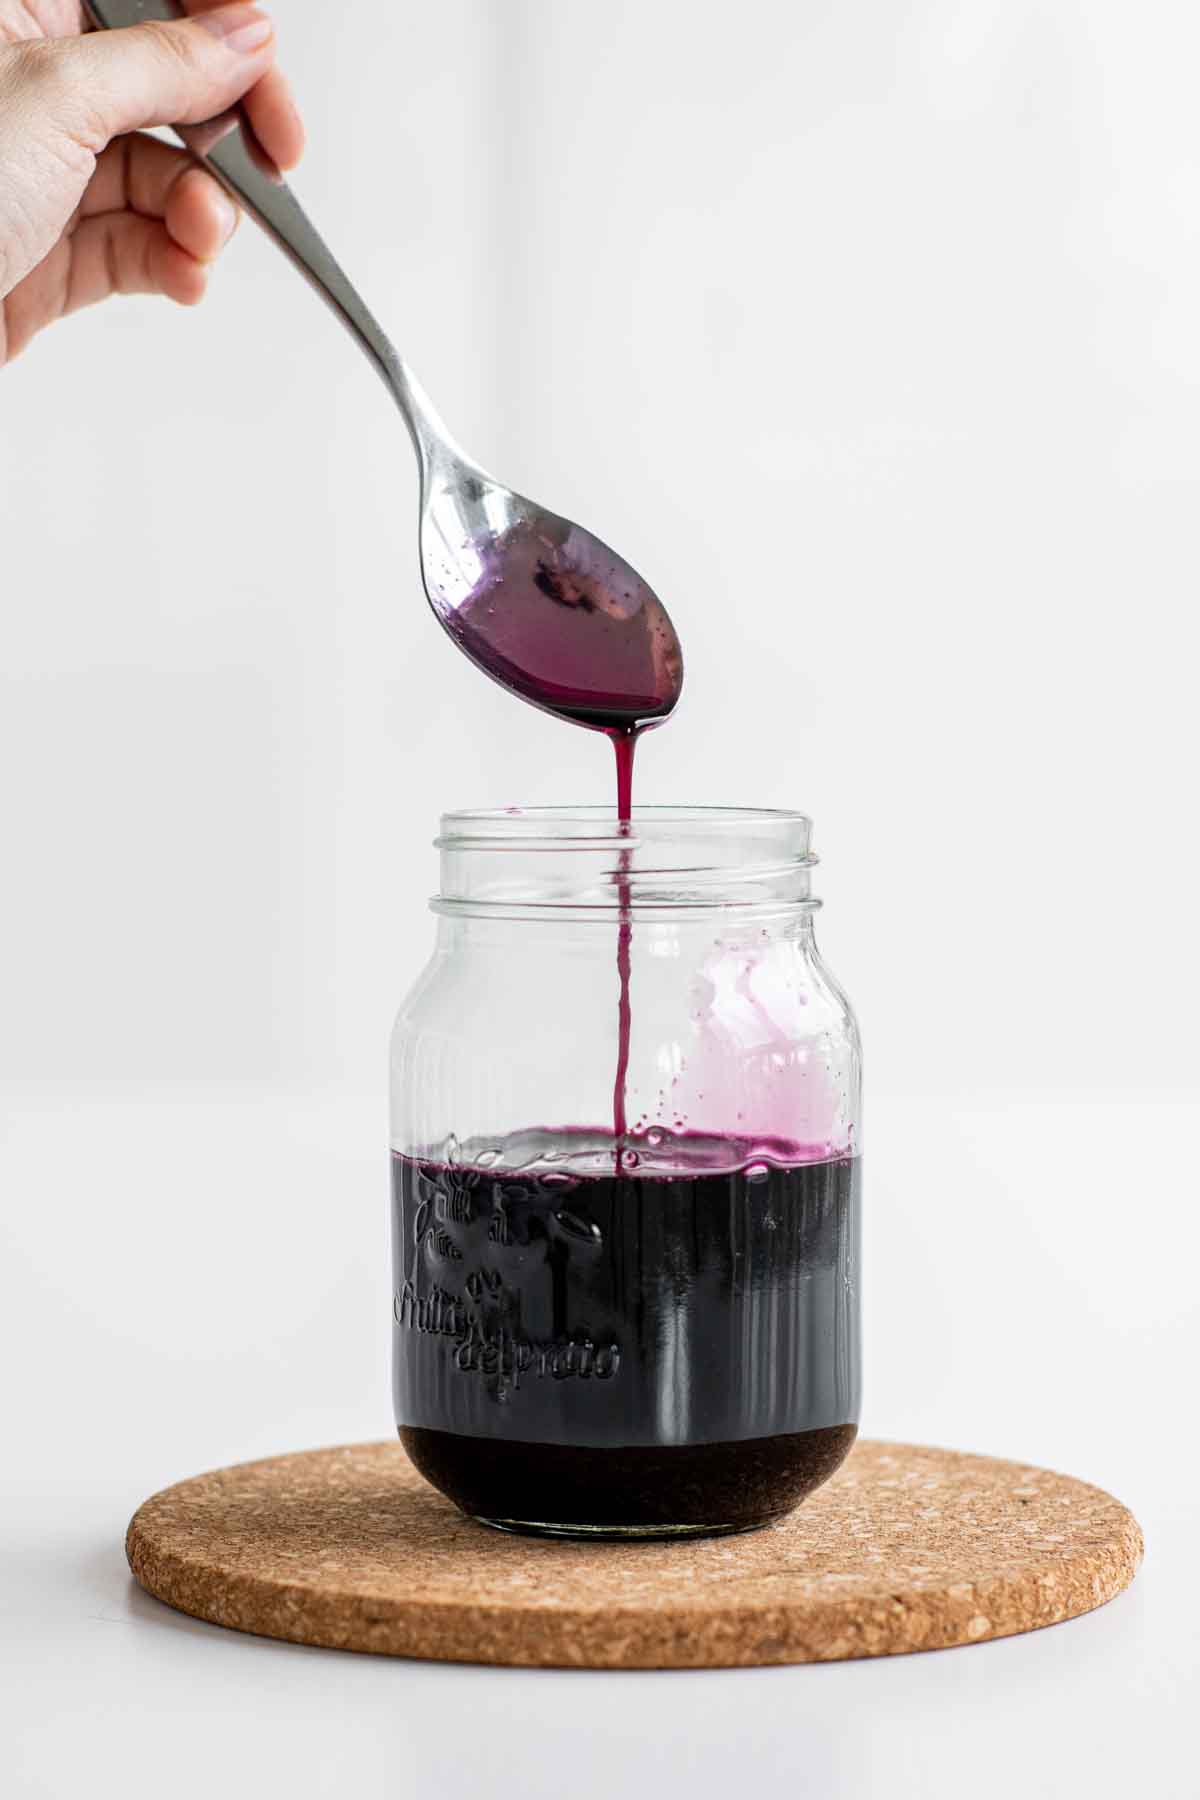 Blueberry syrup dripping from a spoon.